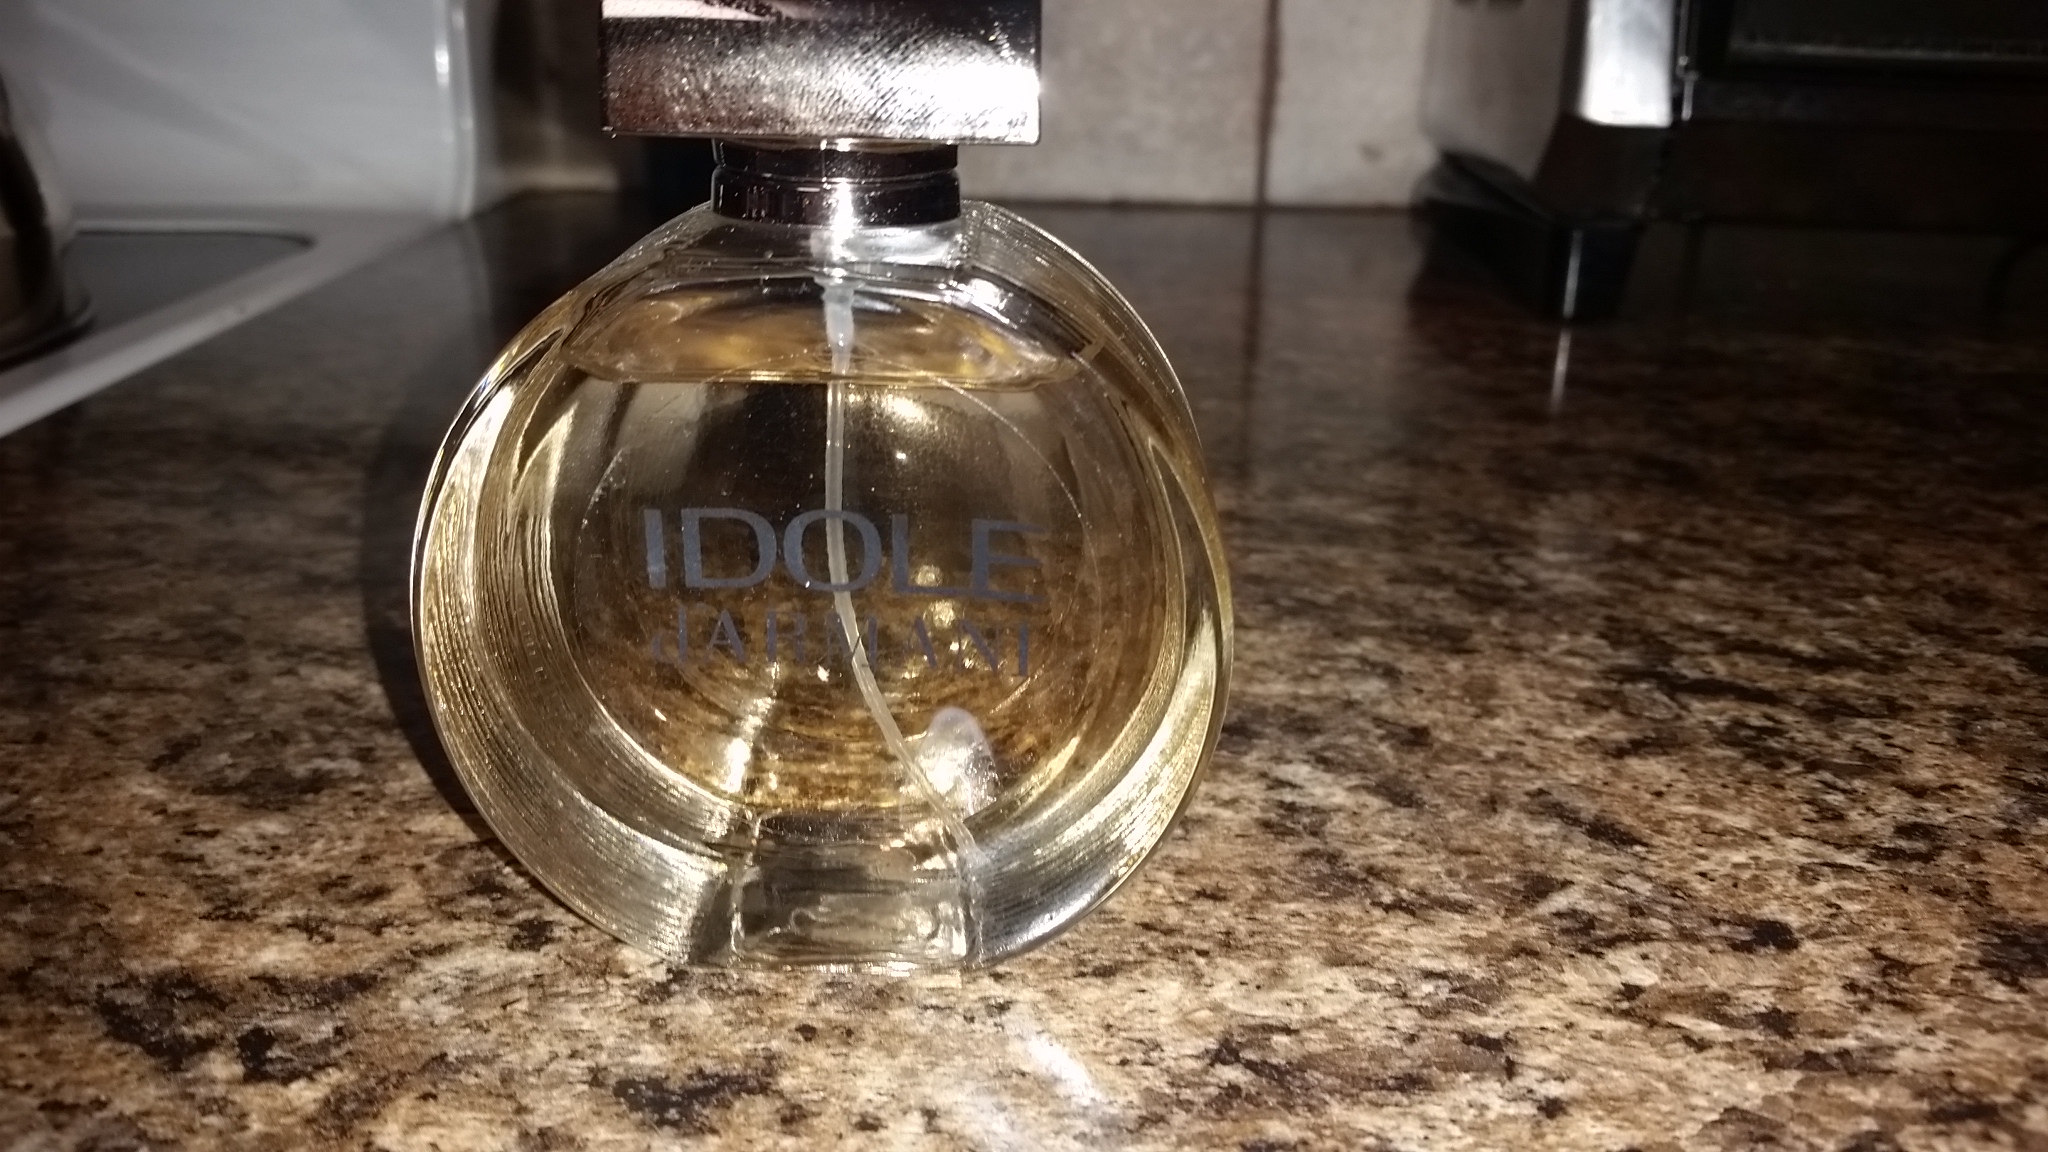 Partial used bottle of Toilette